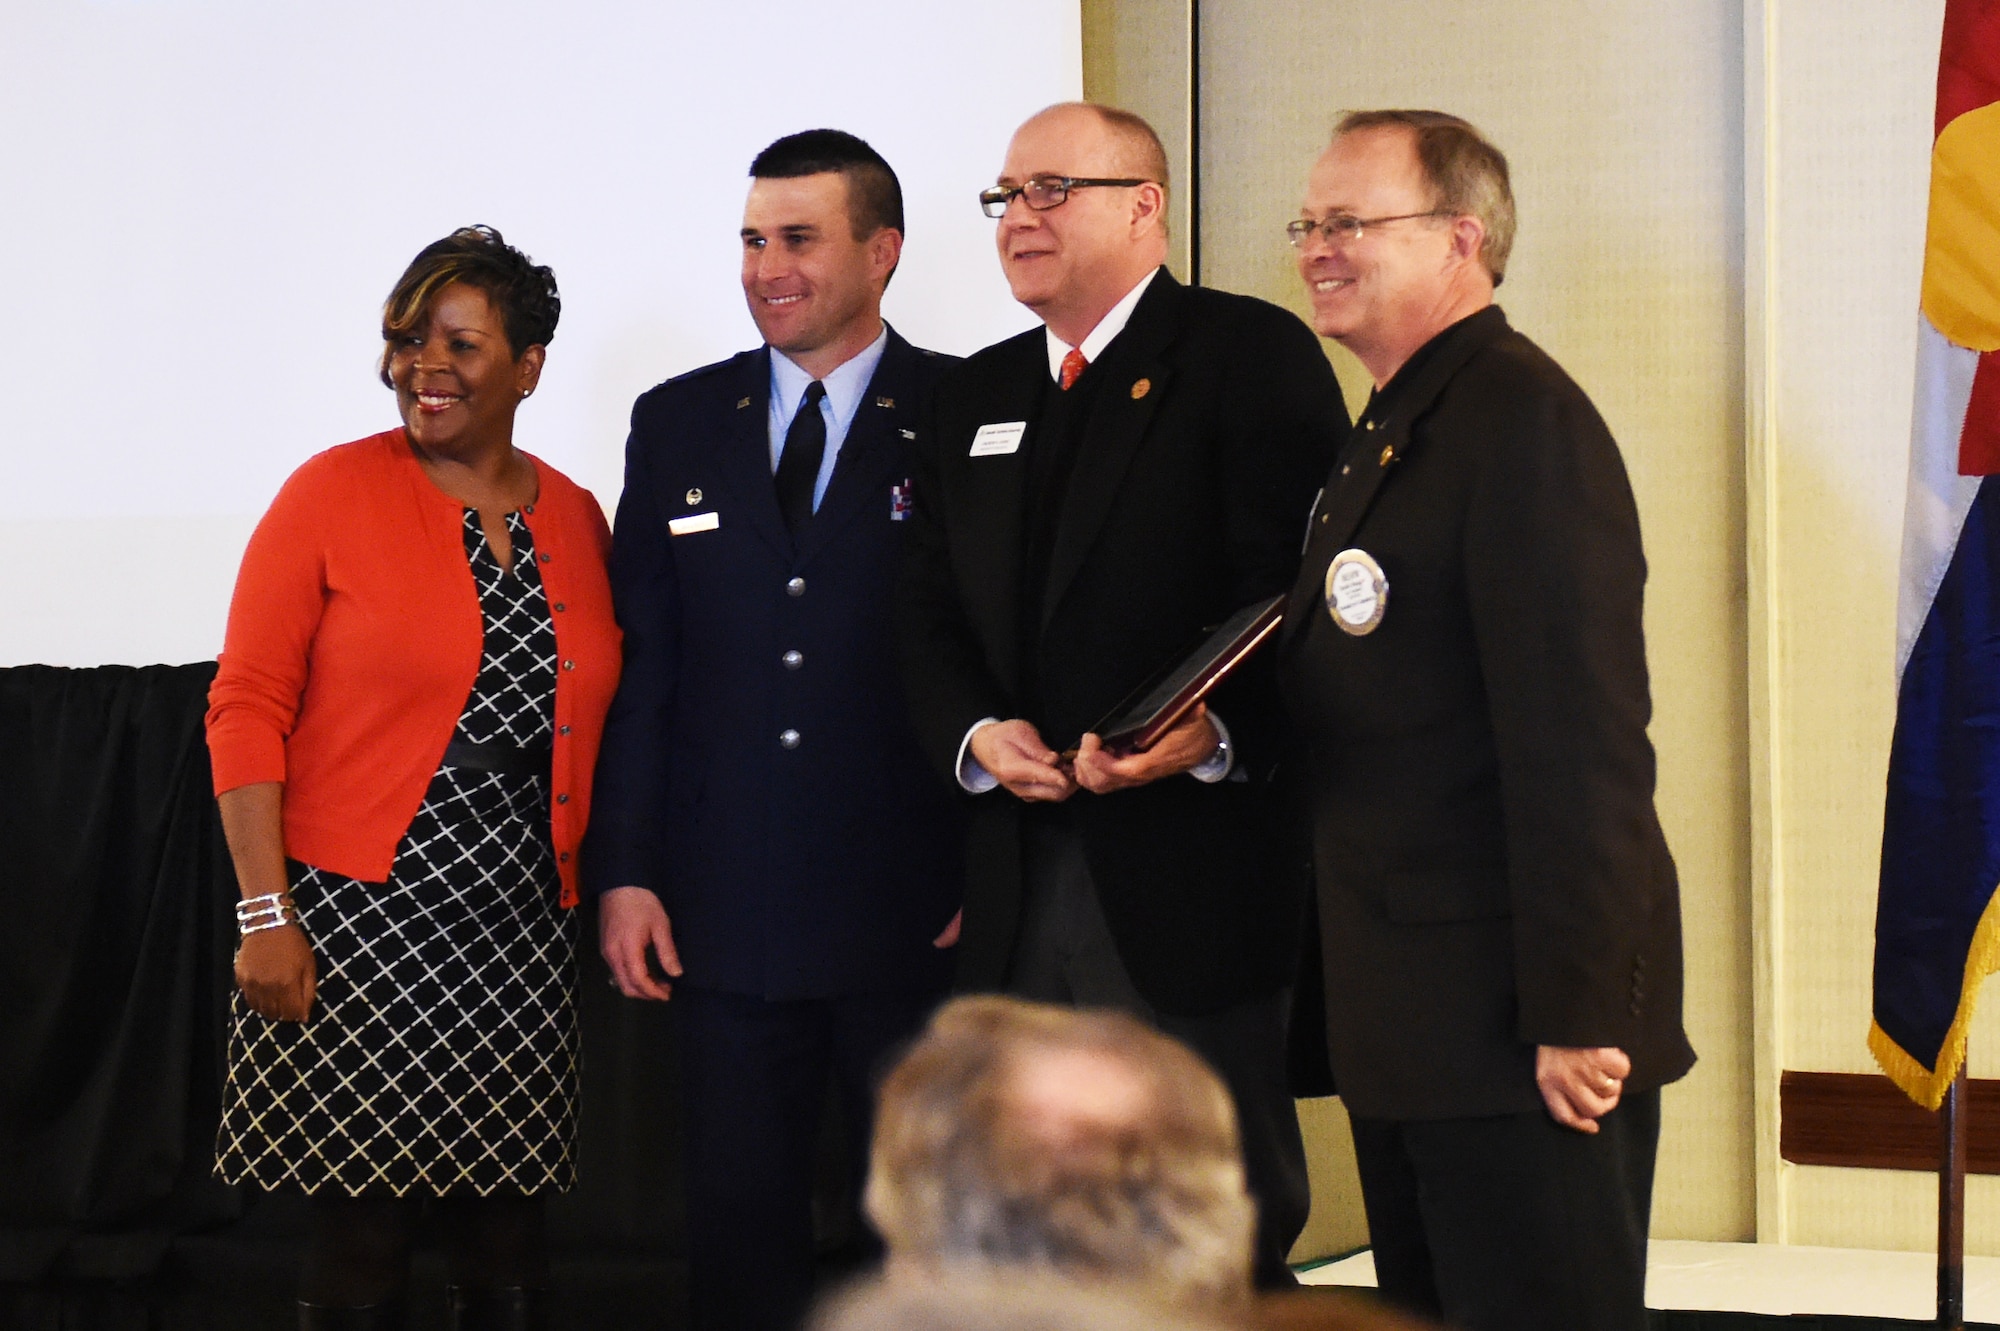 Col. John Wagner, 460th Space Wing commander, stands with community leaders at the State of the Base address Jan. 21, 2015, at the DoubleTree by Hilton in Aurora, Colo. During the speech, Wagner discussed the base’s mission and current and upcoming events for Team Buckley, along with the base’s economic impact on the community, Aurora Rotary and Aurora Chamber of Commerce. (U.S. Air Force photo by Airman 1st Class Samantha Saulsbury/Released)